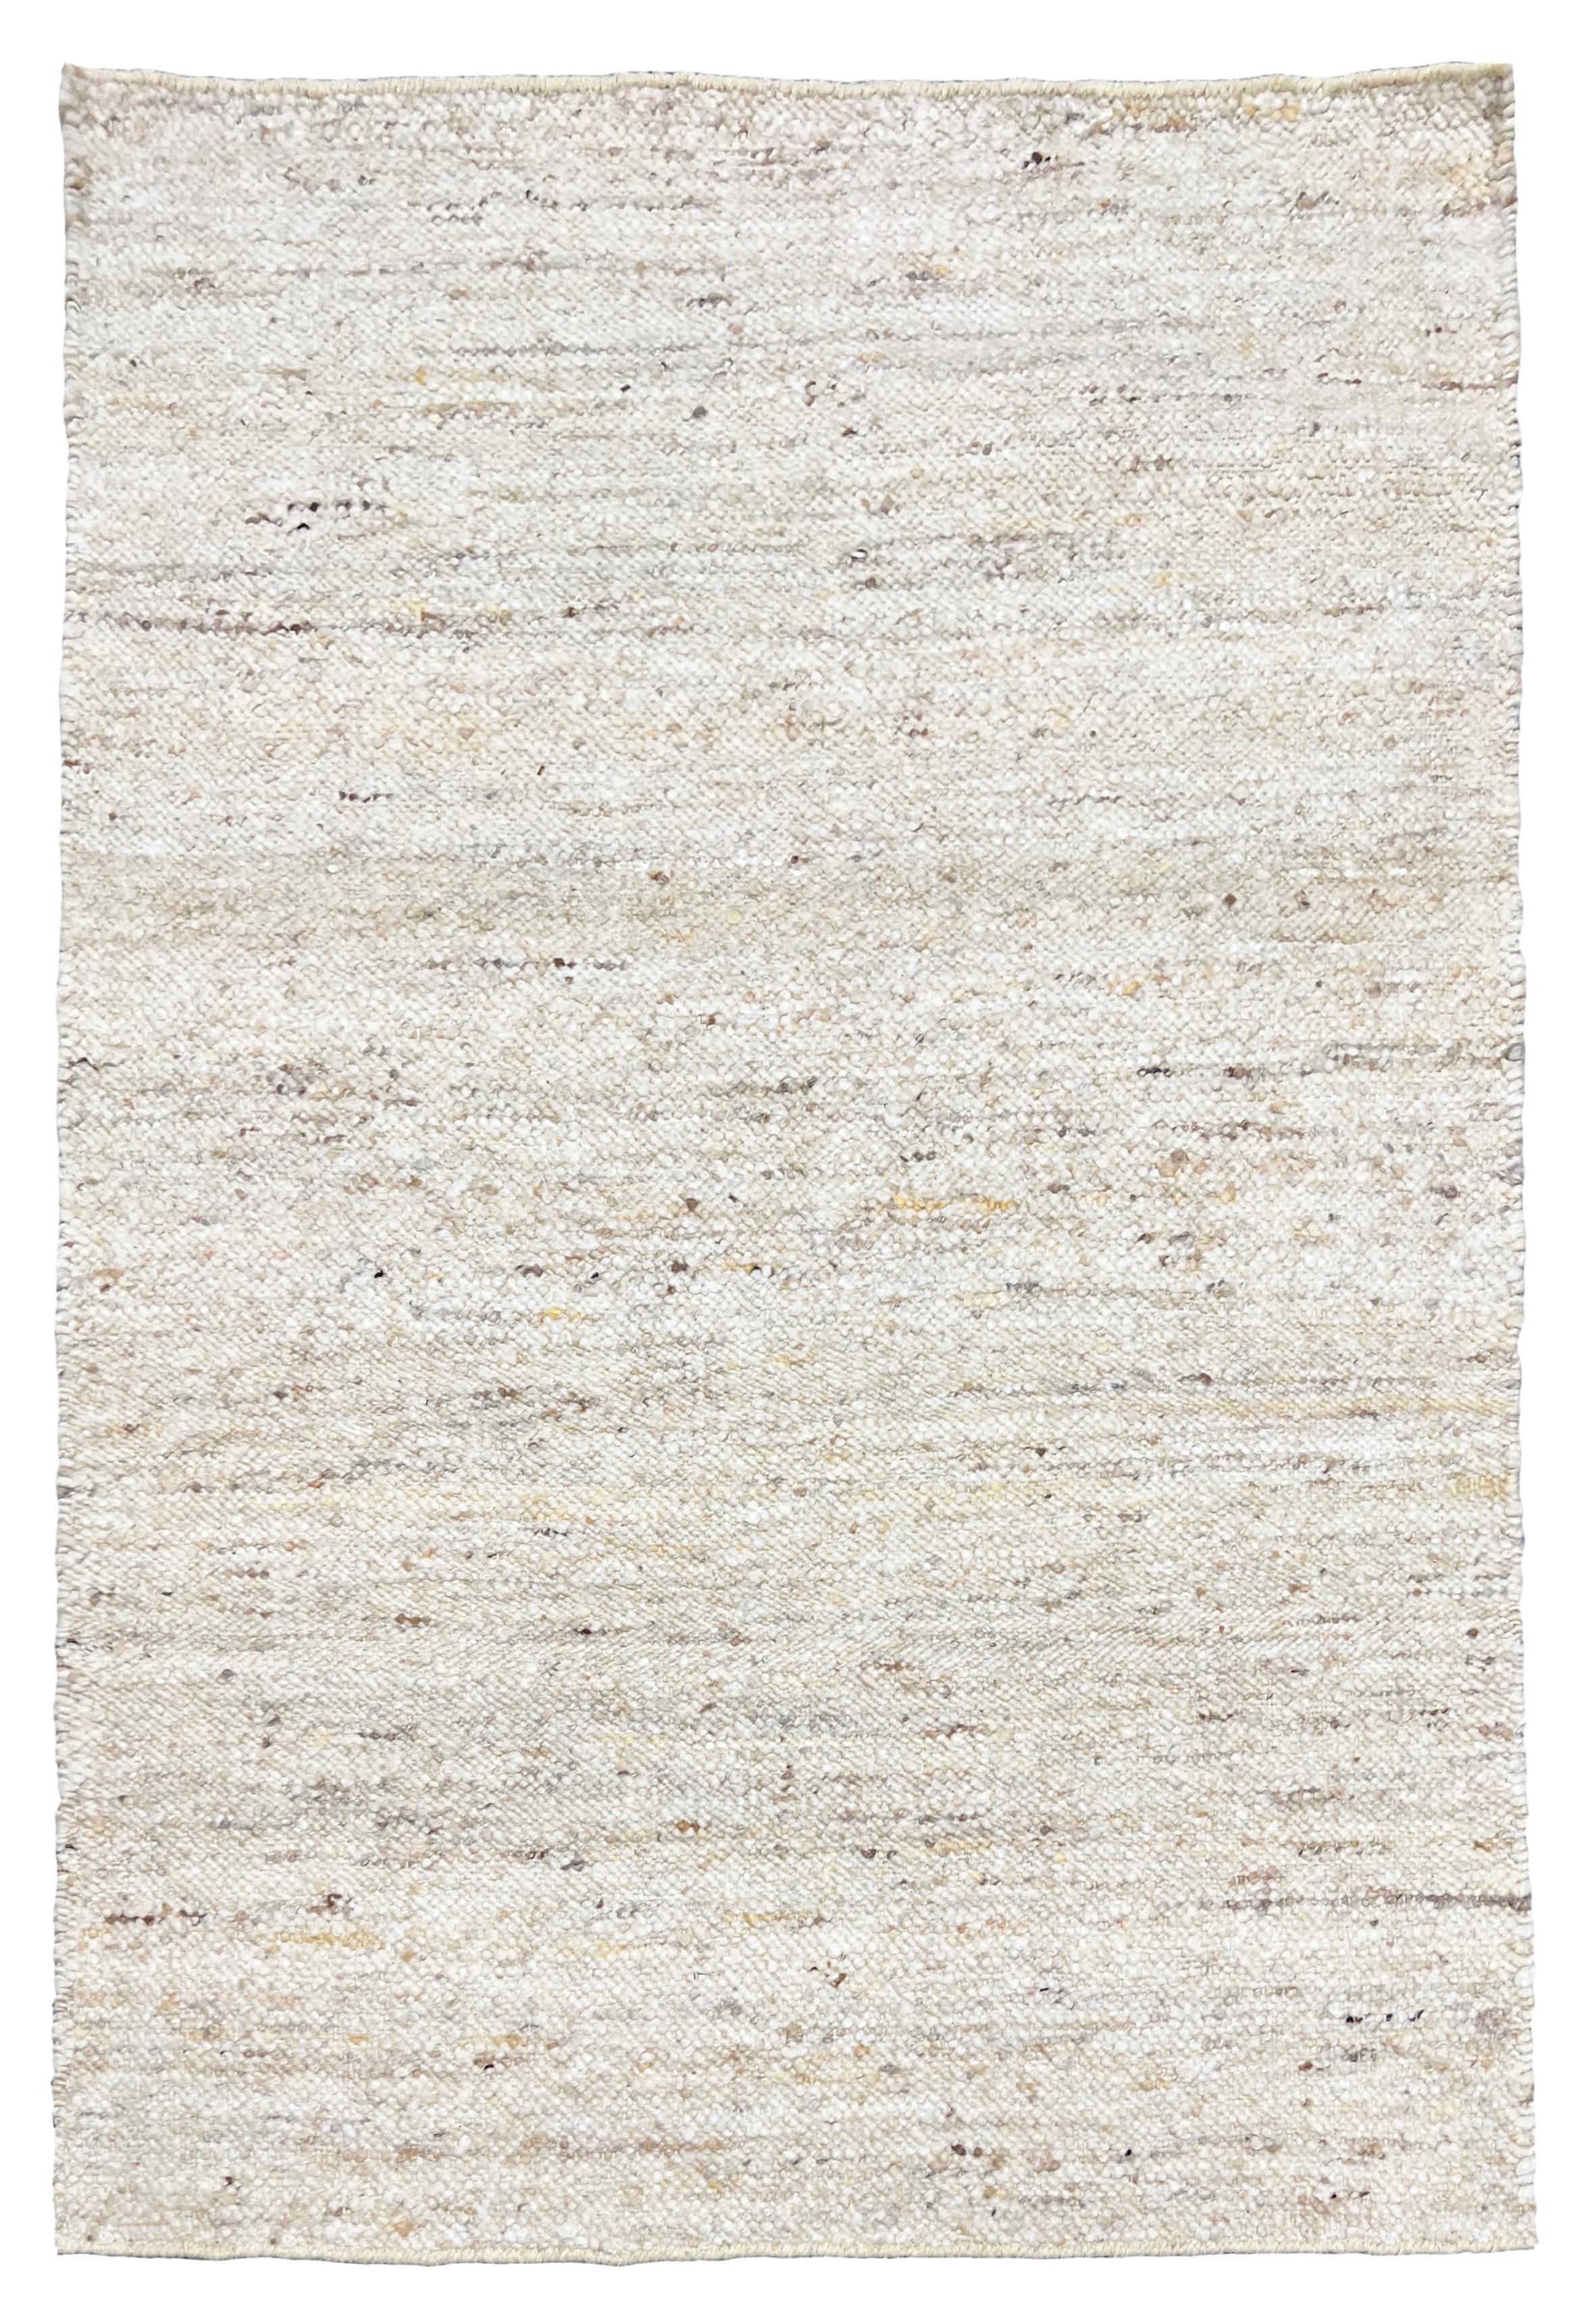 8' x 10'

Hand knotted, flat-weave raw wool

Origin: India

Field Color: Ivory

Accent Colors: Brown, Beige